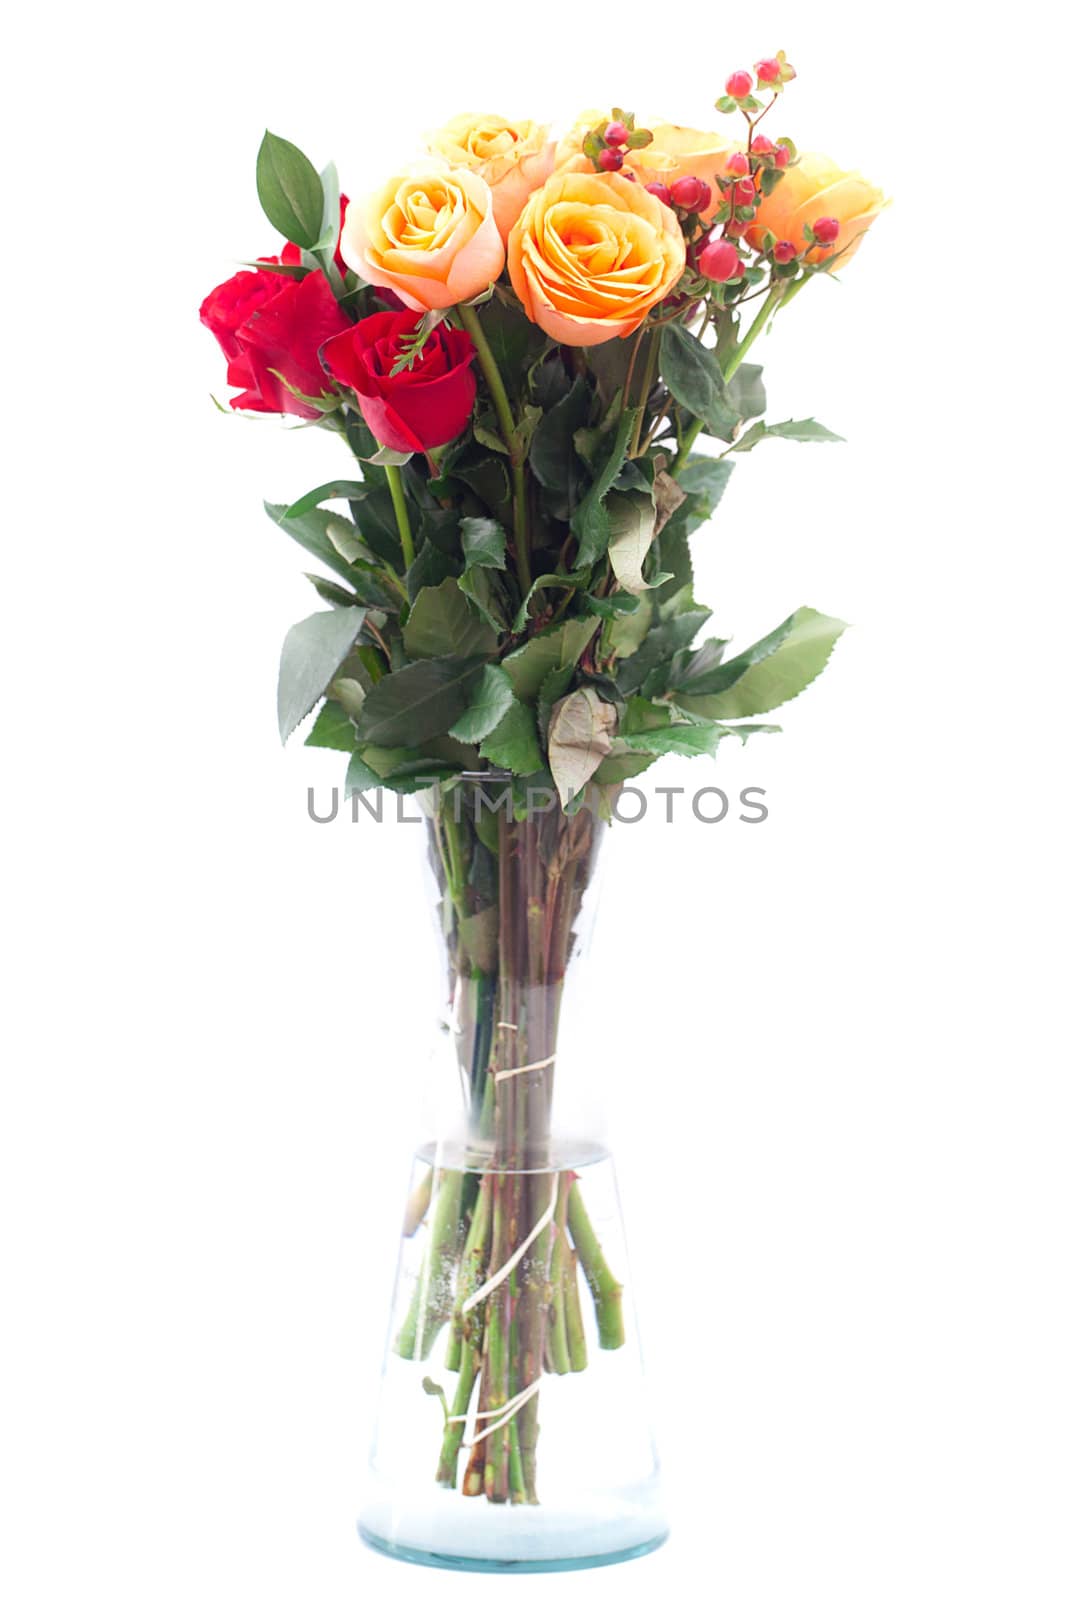 bouquet of colorful roses in a vase on white background